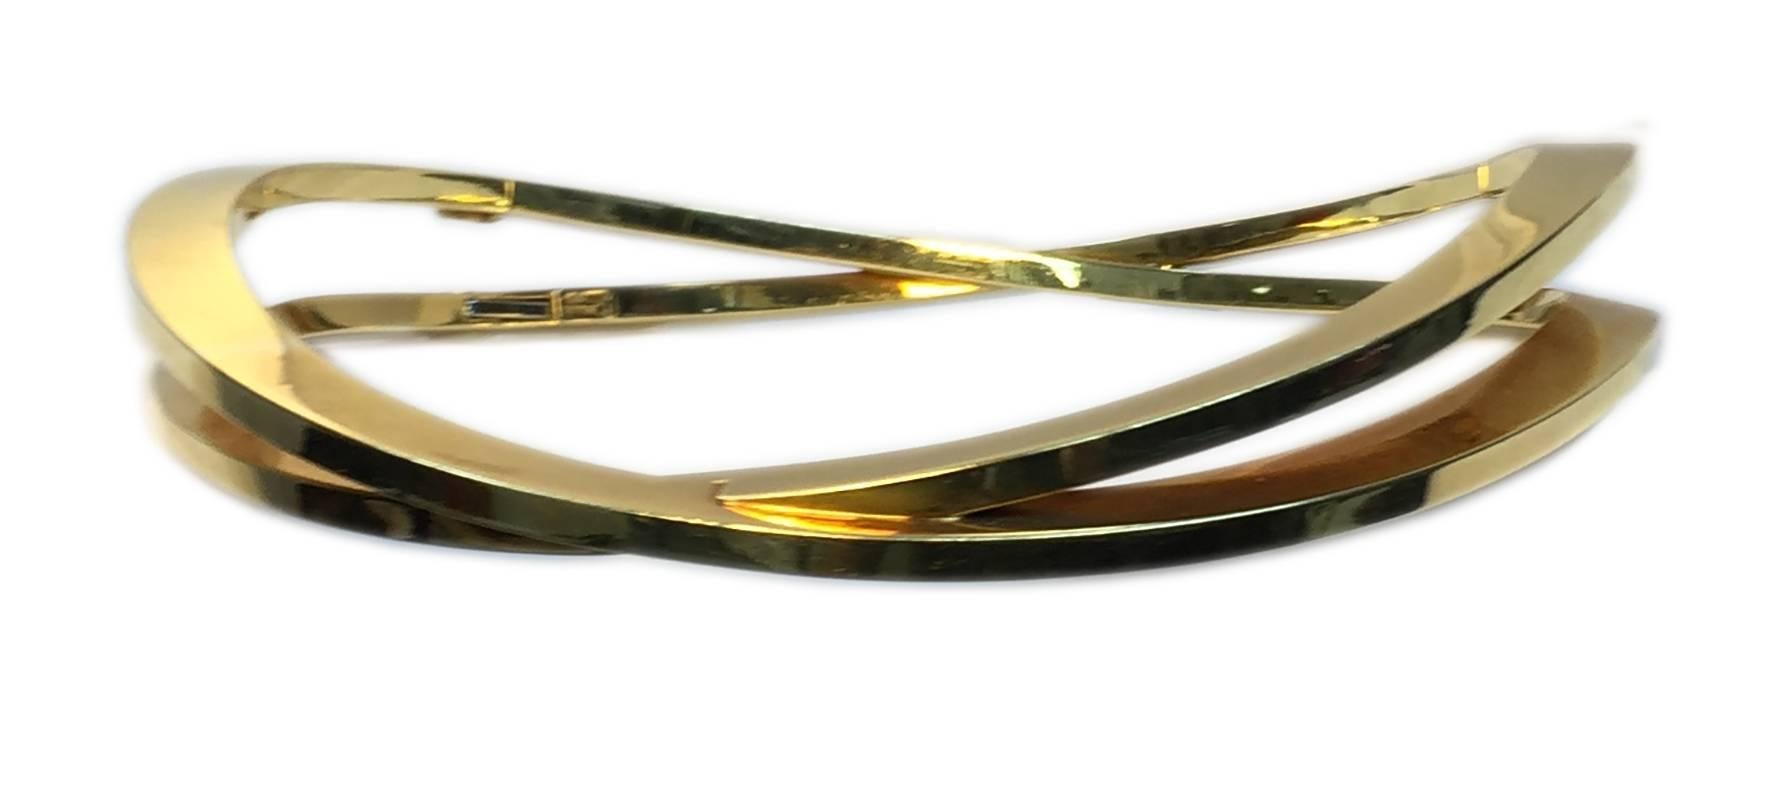 An unusual collar of planetary design, finely manufactured in Italy (marks for Vicenza) in 18kt yellow gold. Circa 1970